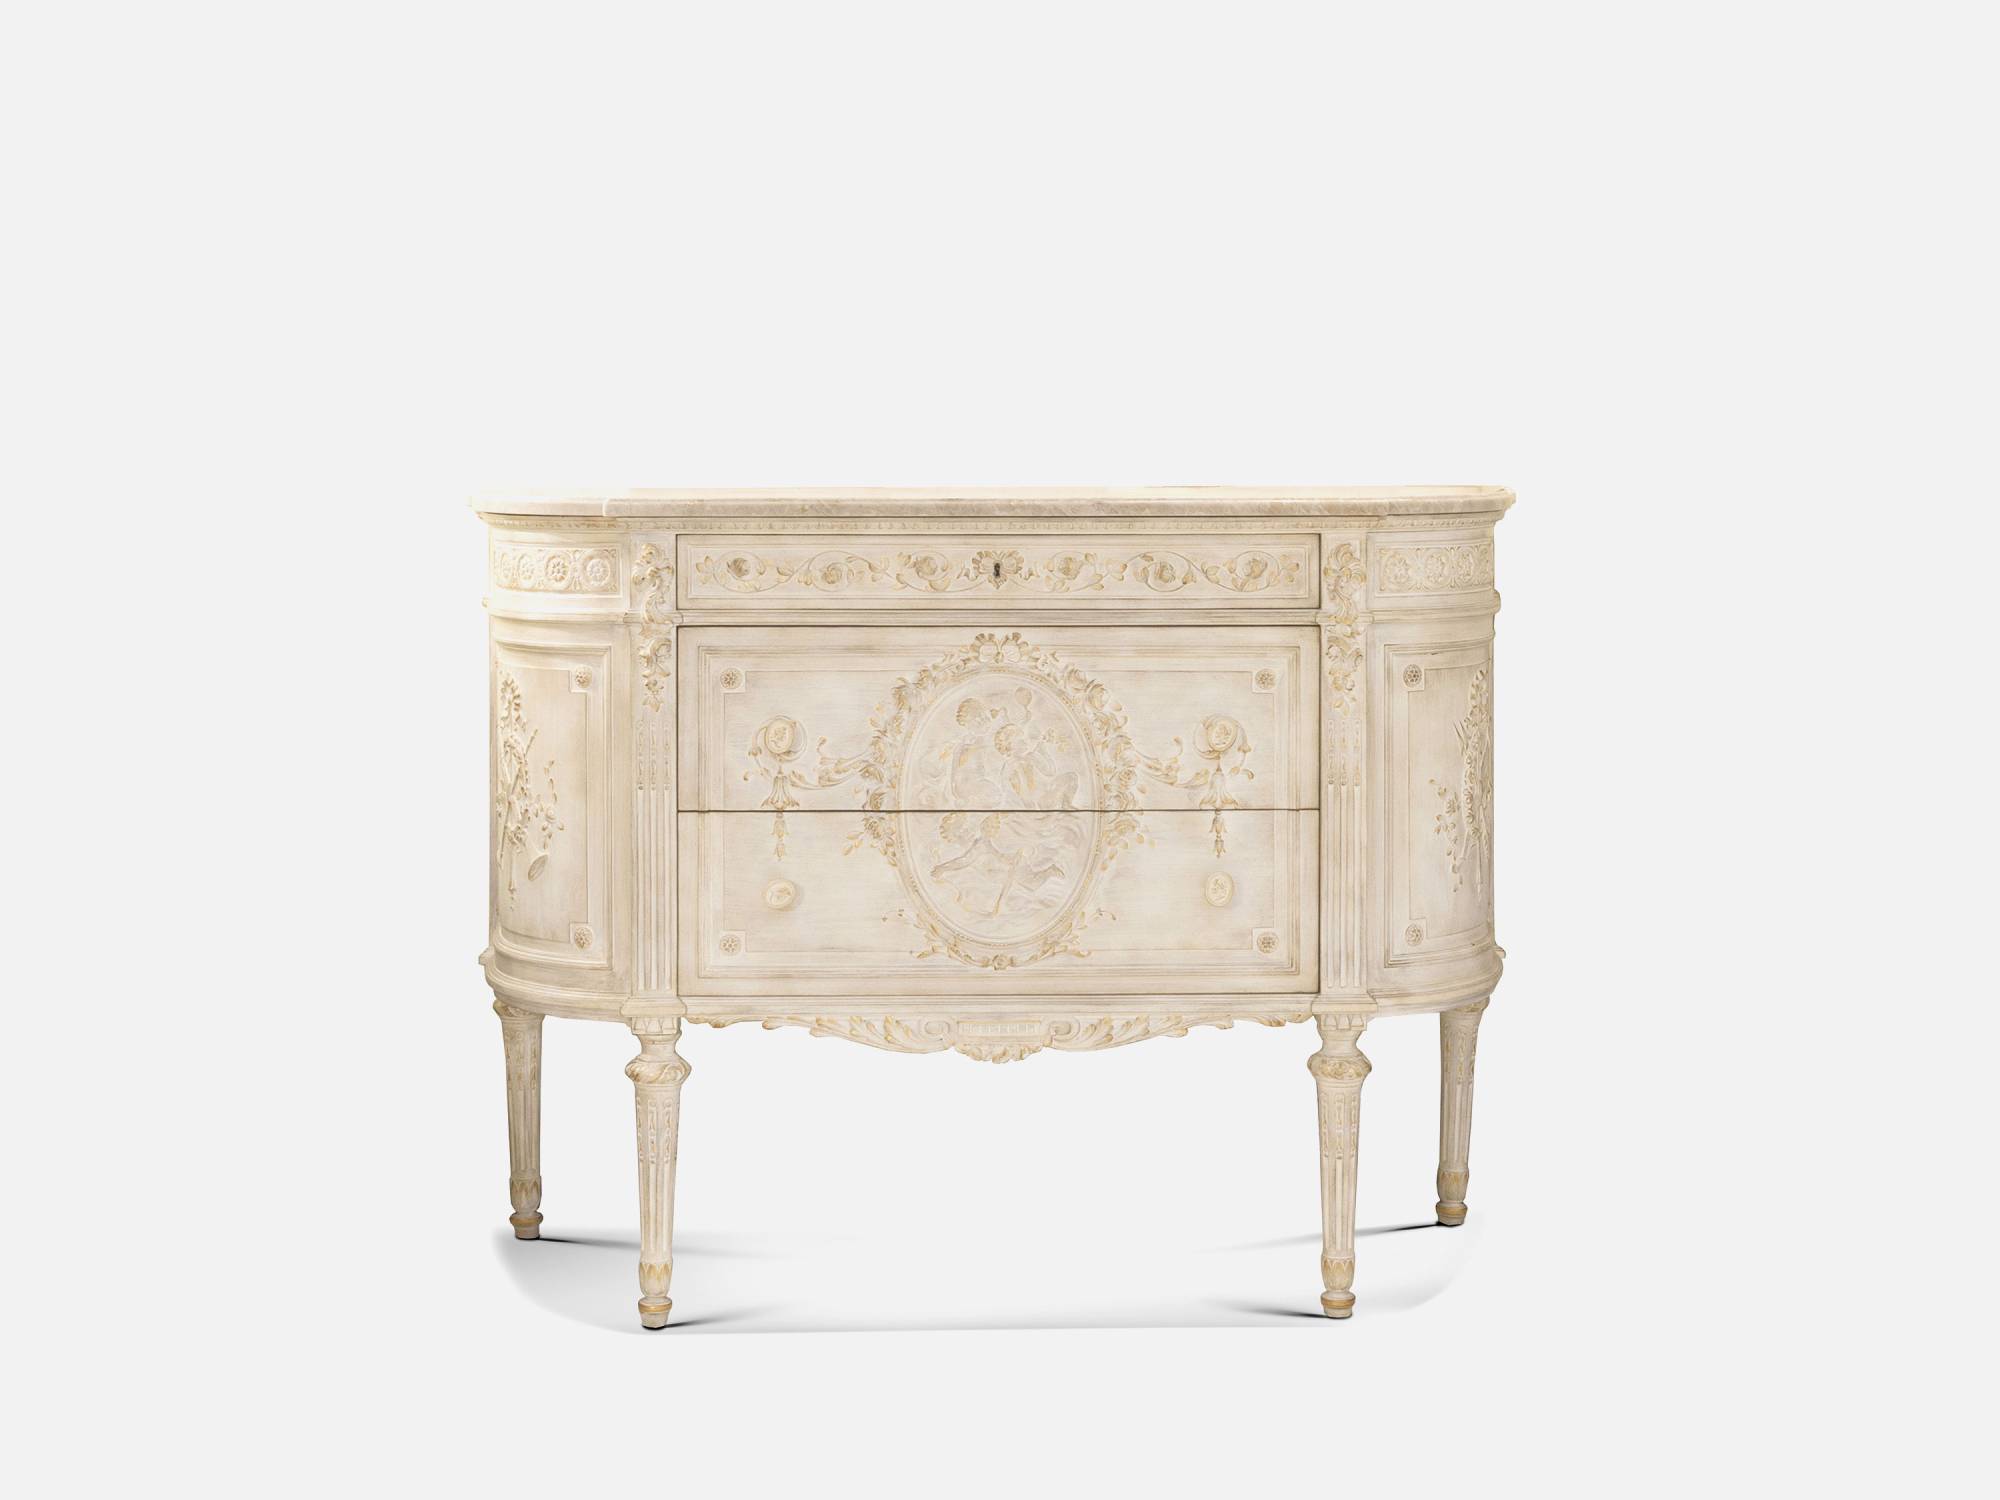 ART. 2011-19 - C.G. Capelletti quality furniture with made in Italy contemporary Chest of drawers